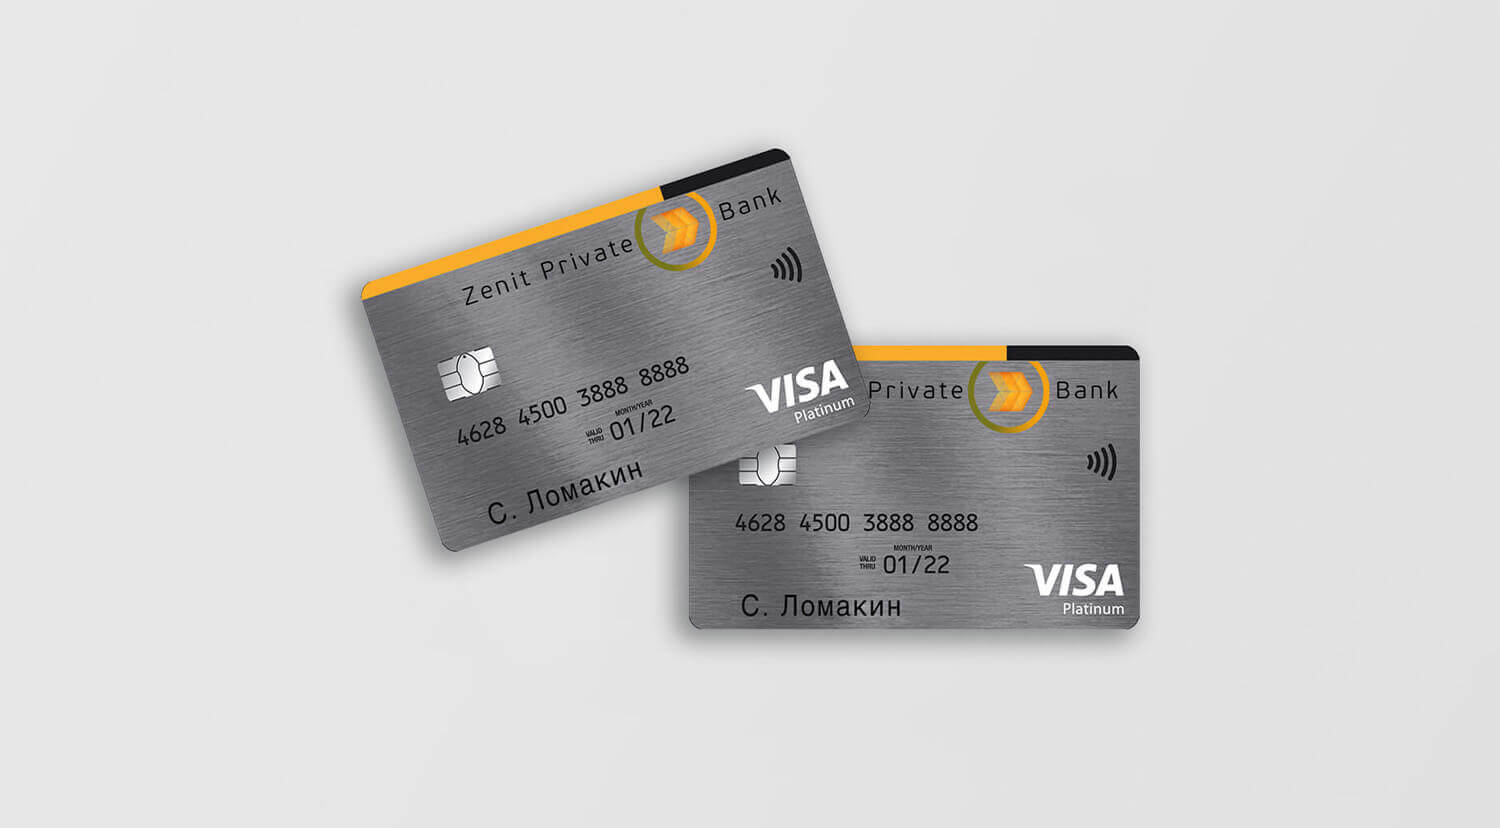 Zenit Bank Russia, Private Banking Credit Card Design - Campbell Rigg Agency